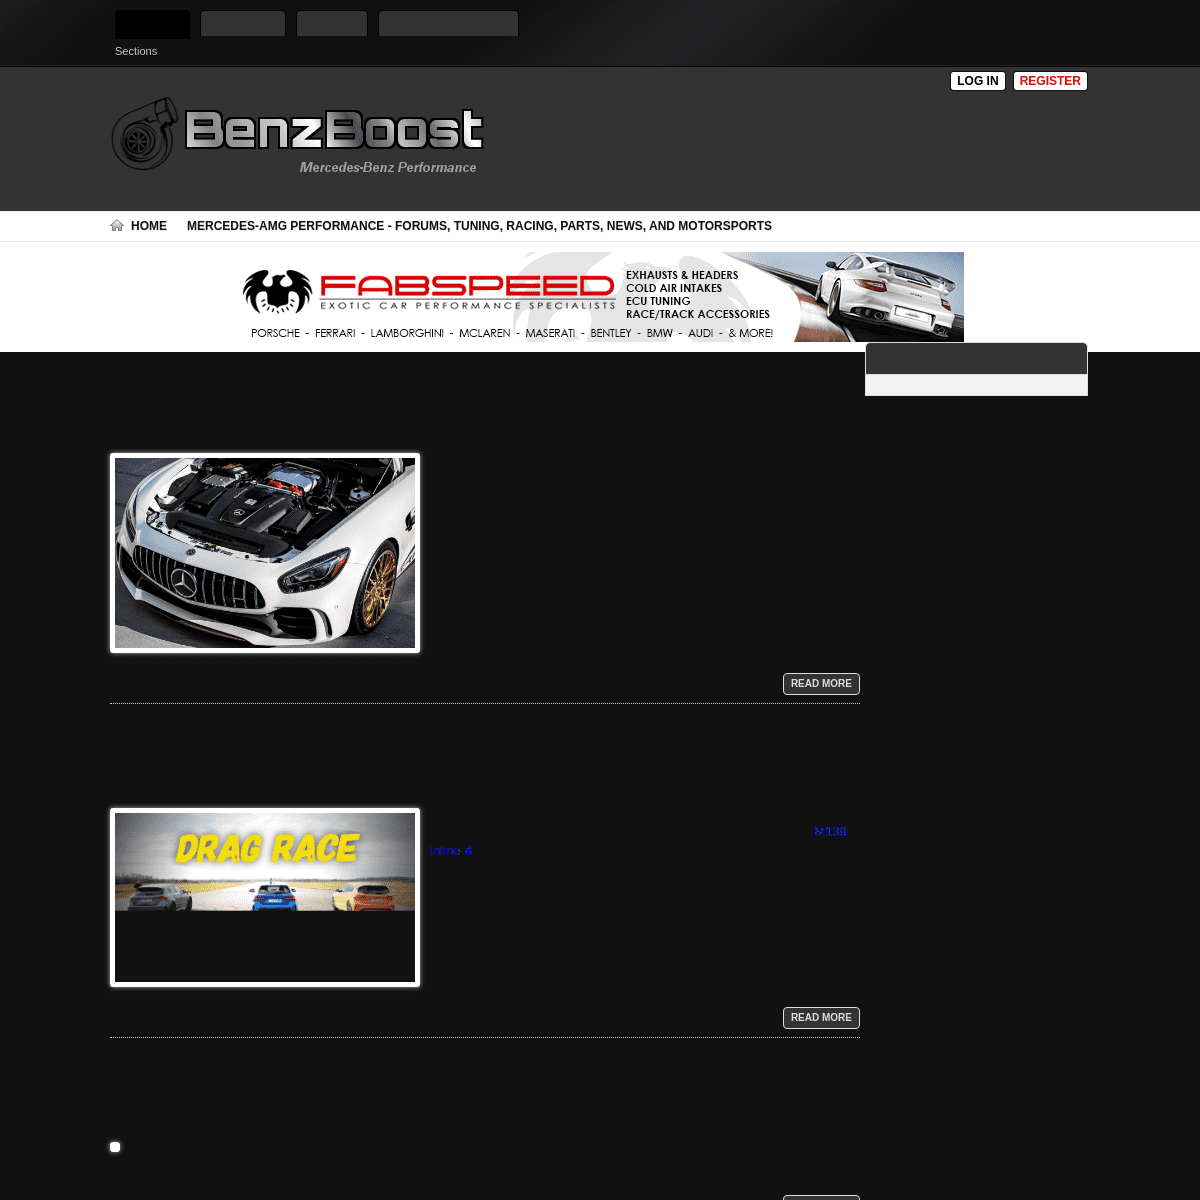 A complete backup of benzboost.com